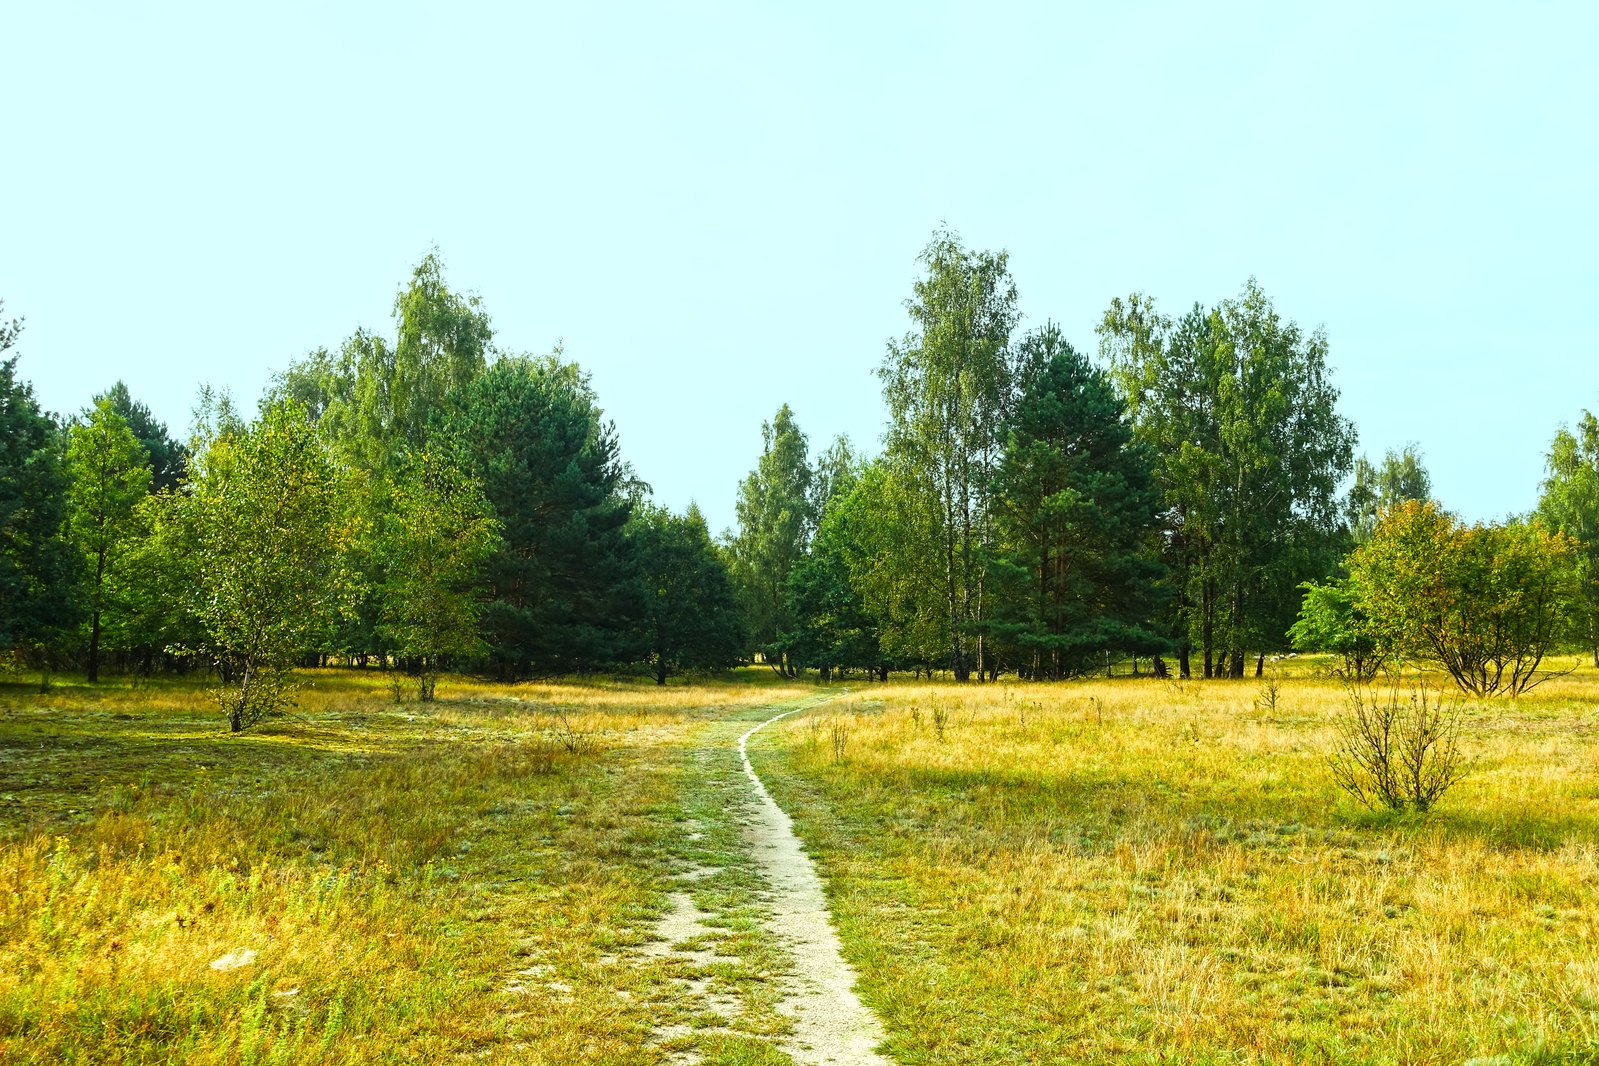 the trail is winding around a field of tall grass